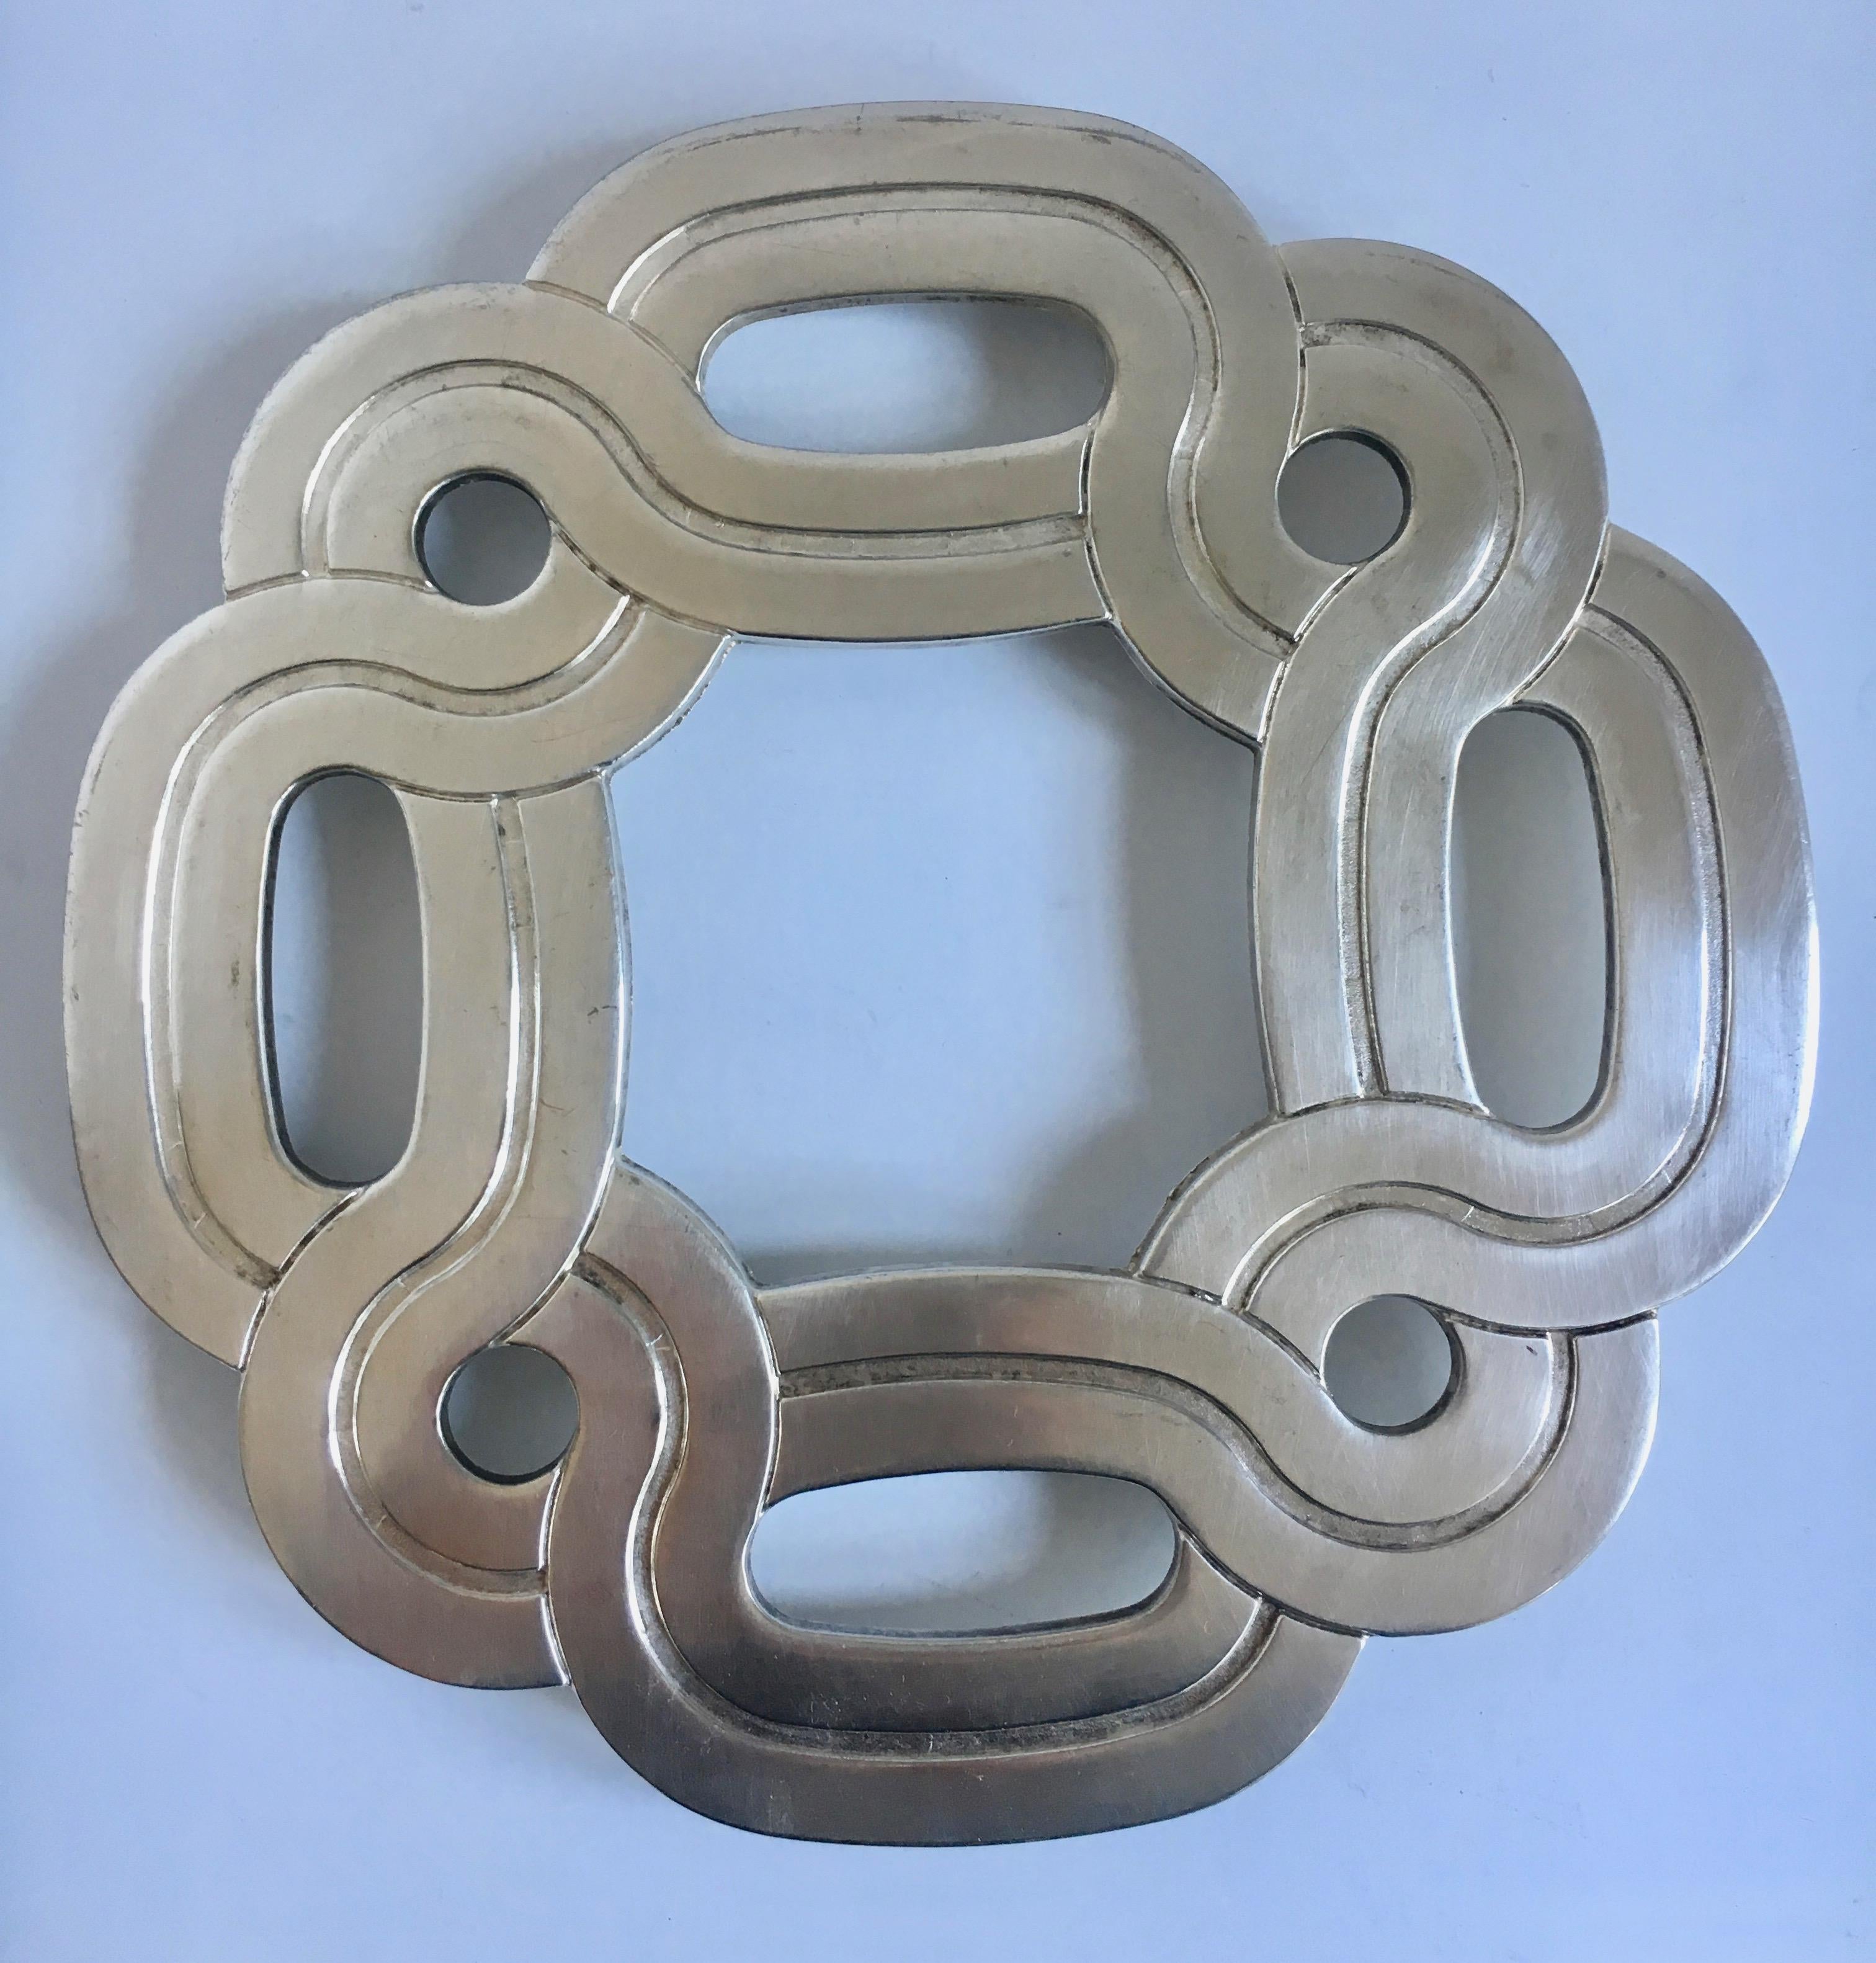 Silver plate Italian trivet - a great decorative pattern, perhaps Celtic. no need to store as this will look great on your counter or hanging on your wall.